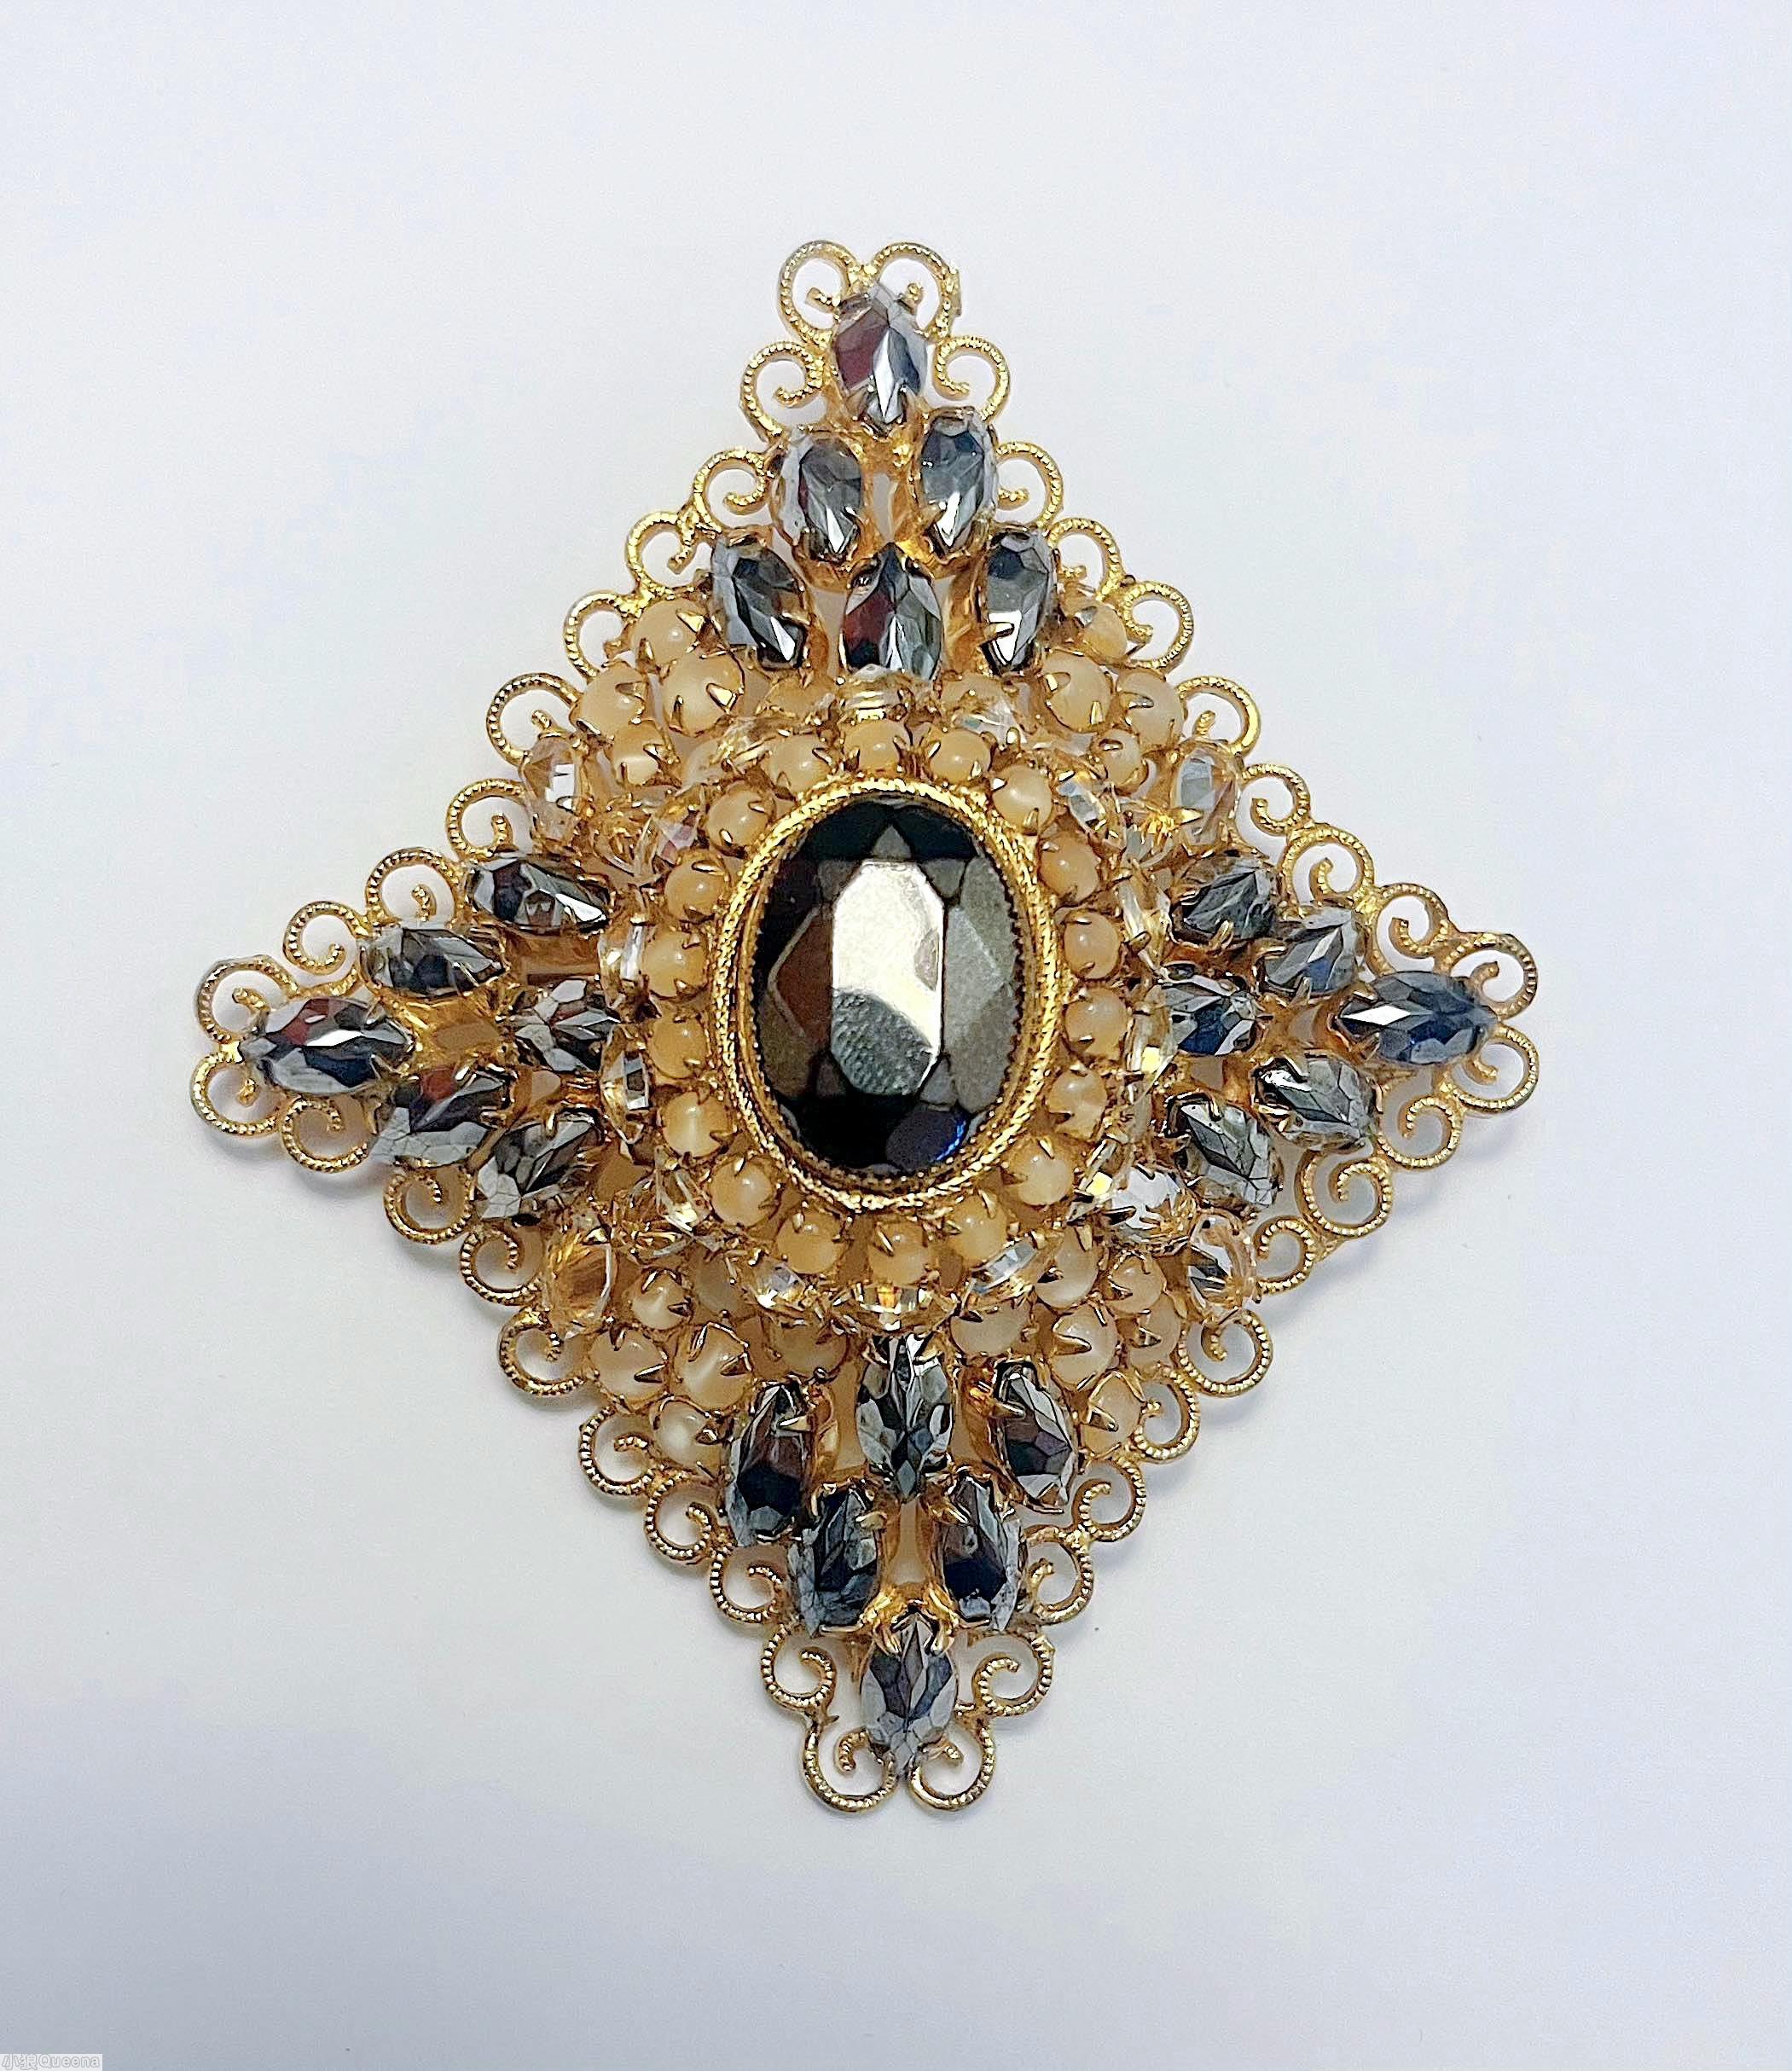 Schreiner domed radial diamond shaped pin large oval center 18 surrounding small chaton 18 navette scrollwork hematite navette moonglow champagne chaton large faceted oval hematite center goldtoned jewelry